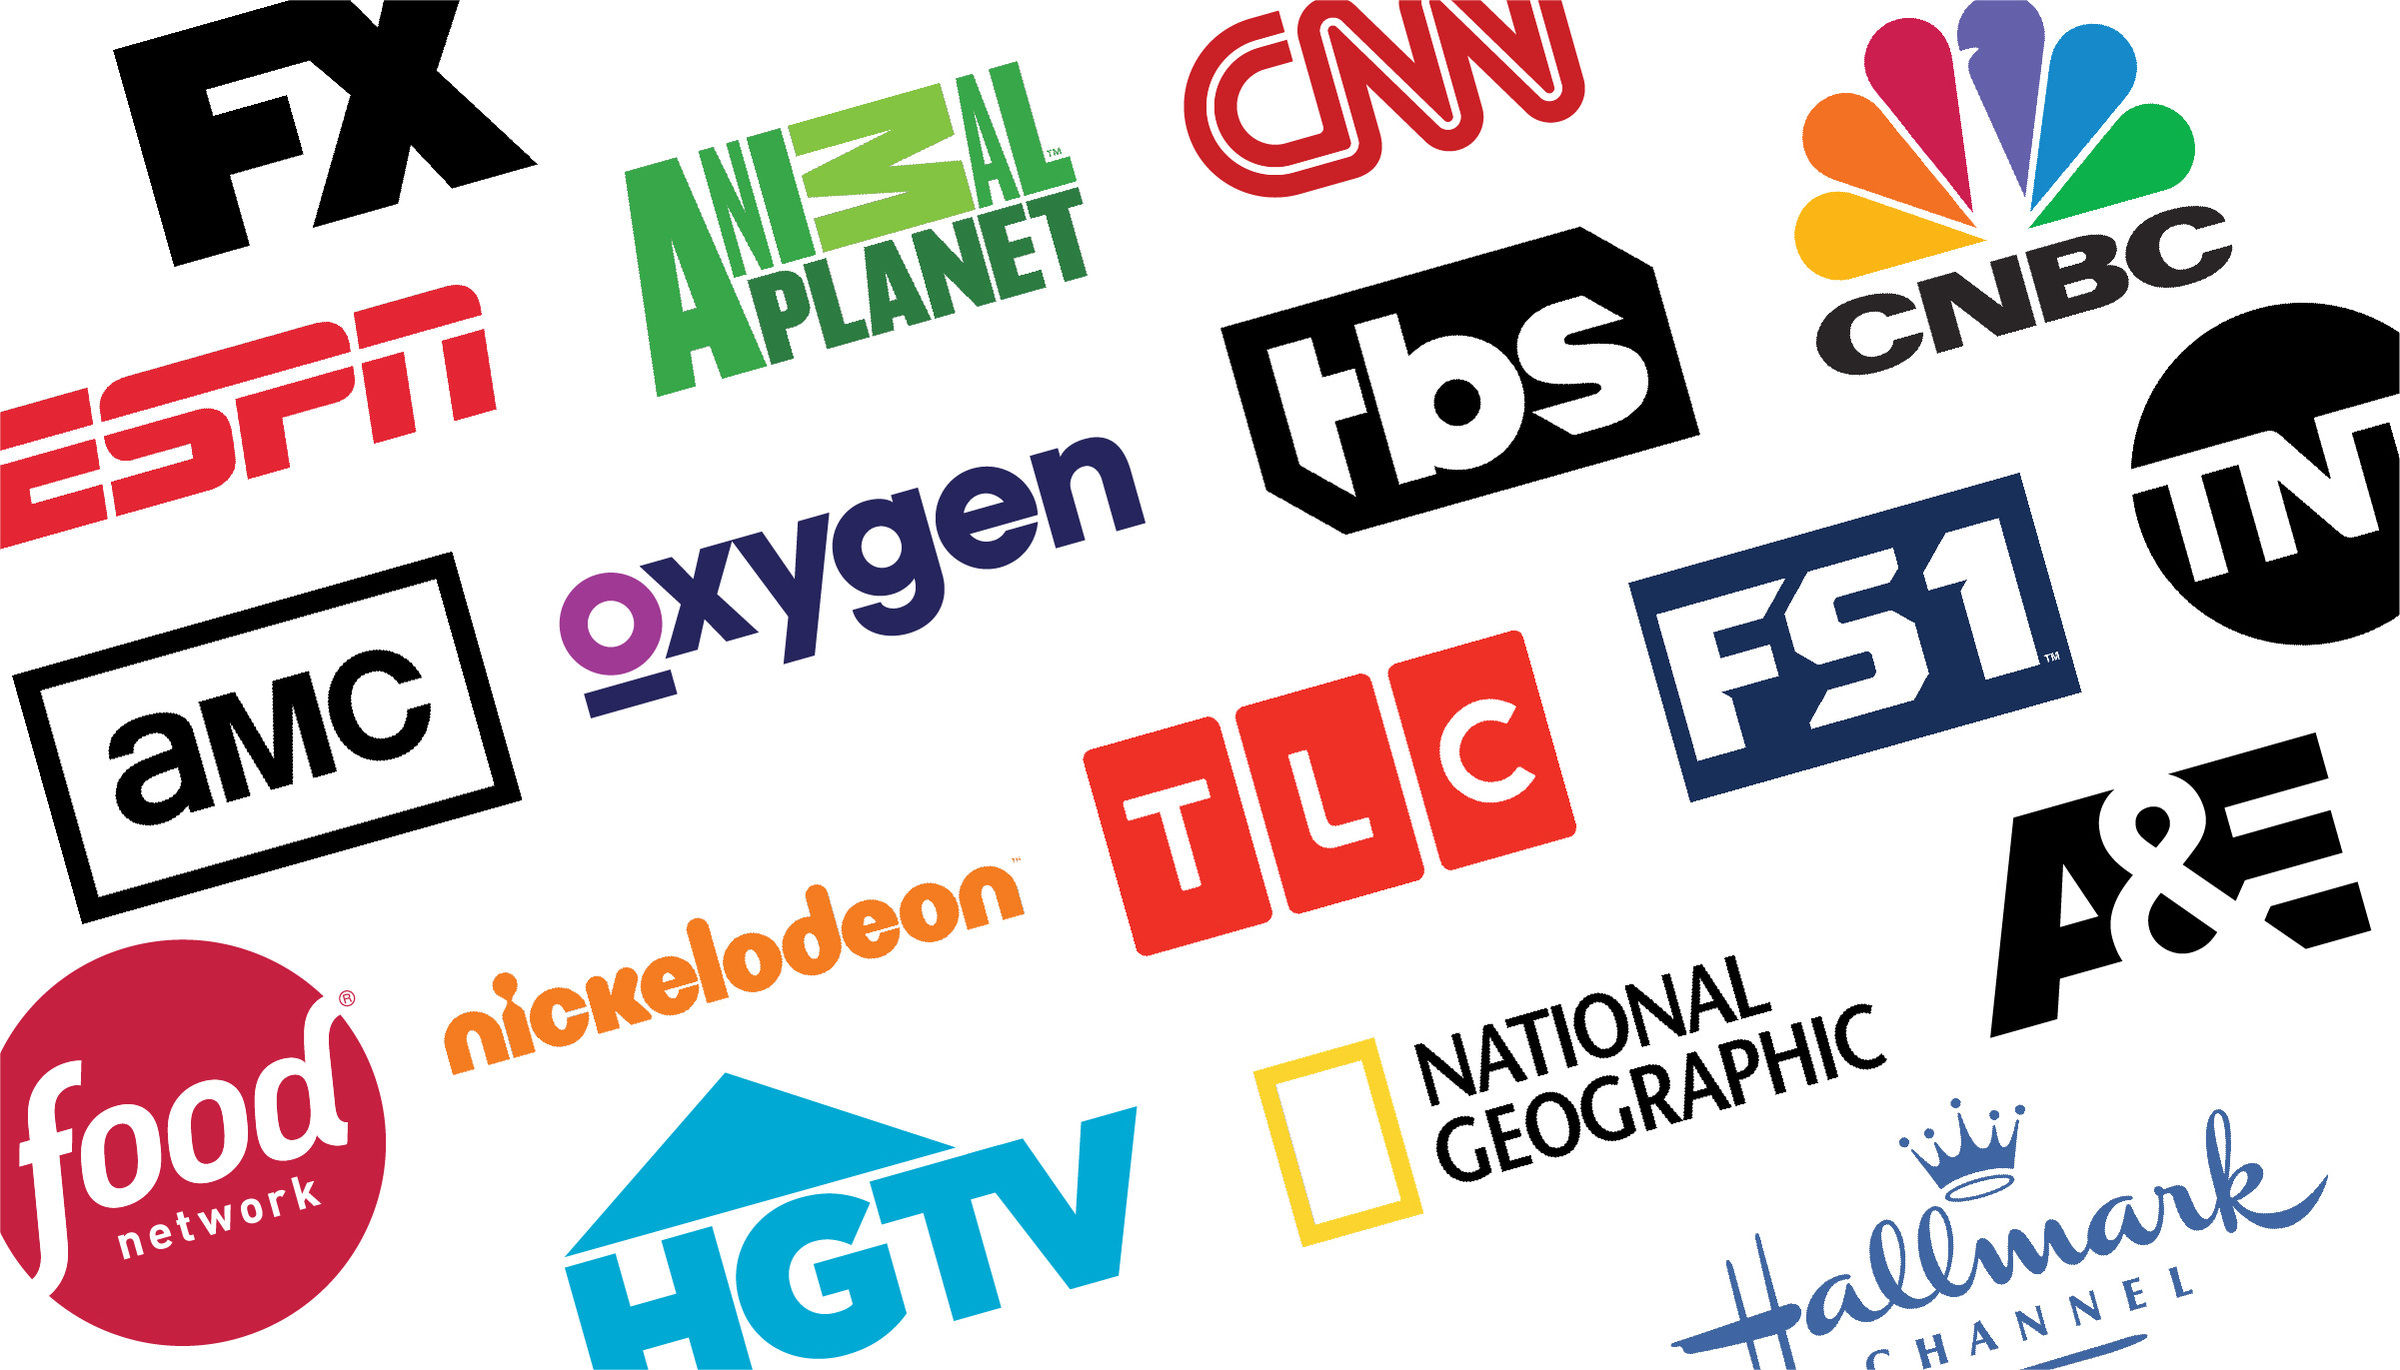 Logos of various cable media networks